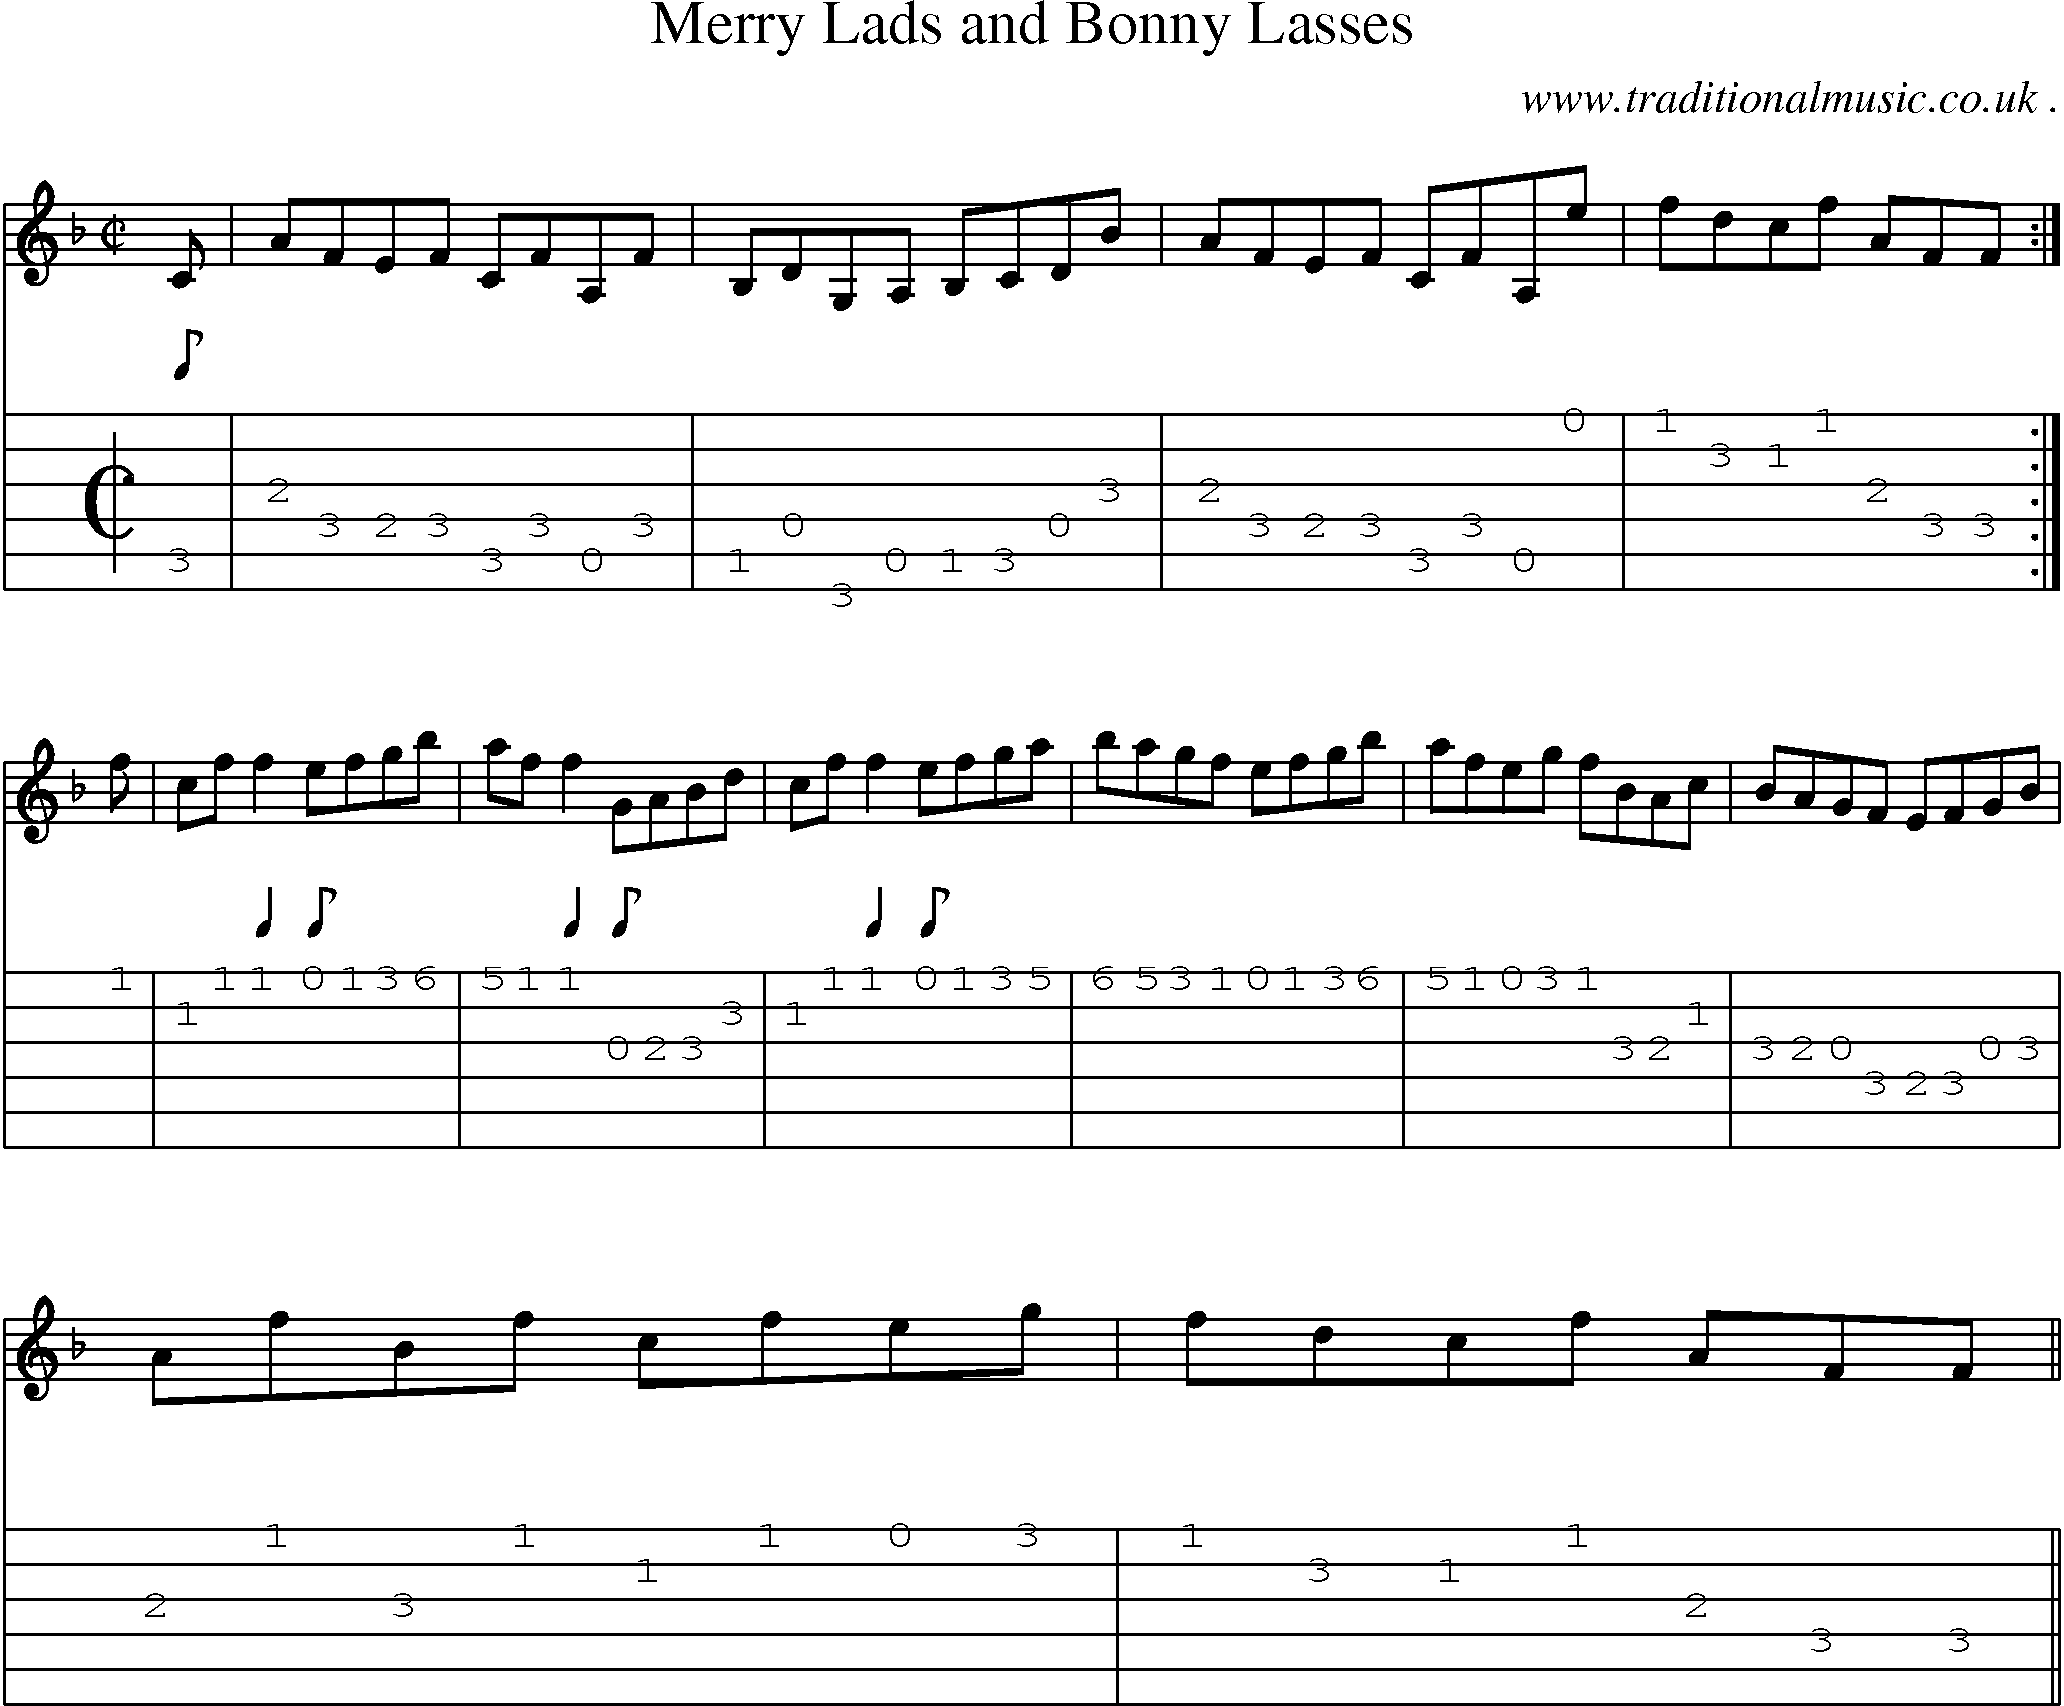 Sheet-music  score, Chords and Guitar Tabs for Merry Lads And Bonny Lasses